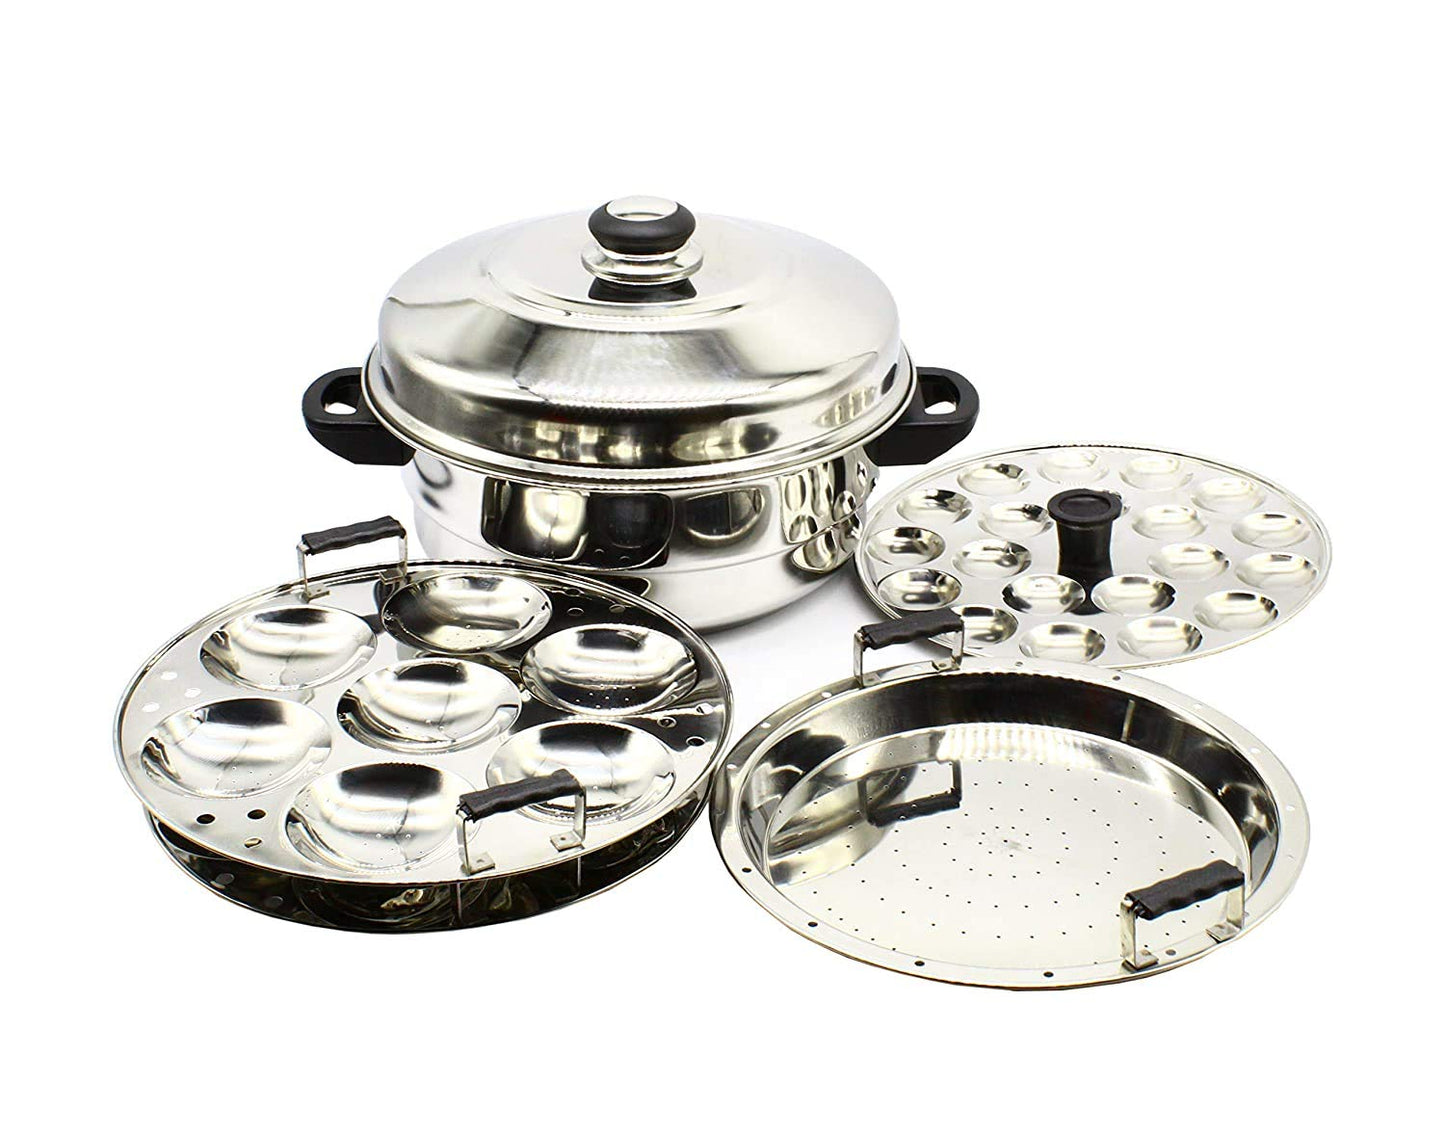 Stainless Steel Multi Steamer Pot 2 Idli Plates (14 Idlis), 1 Mini Idli Plate (20 Mini Idlis) and 1 Multi Purpose Steamer | Idiyappam Steamer Plate (Induction Compatible)